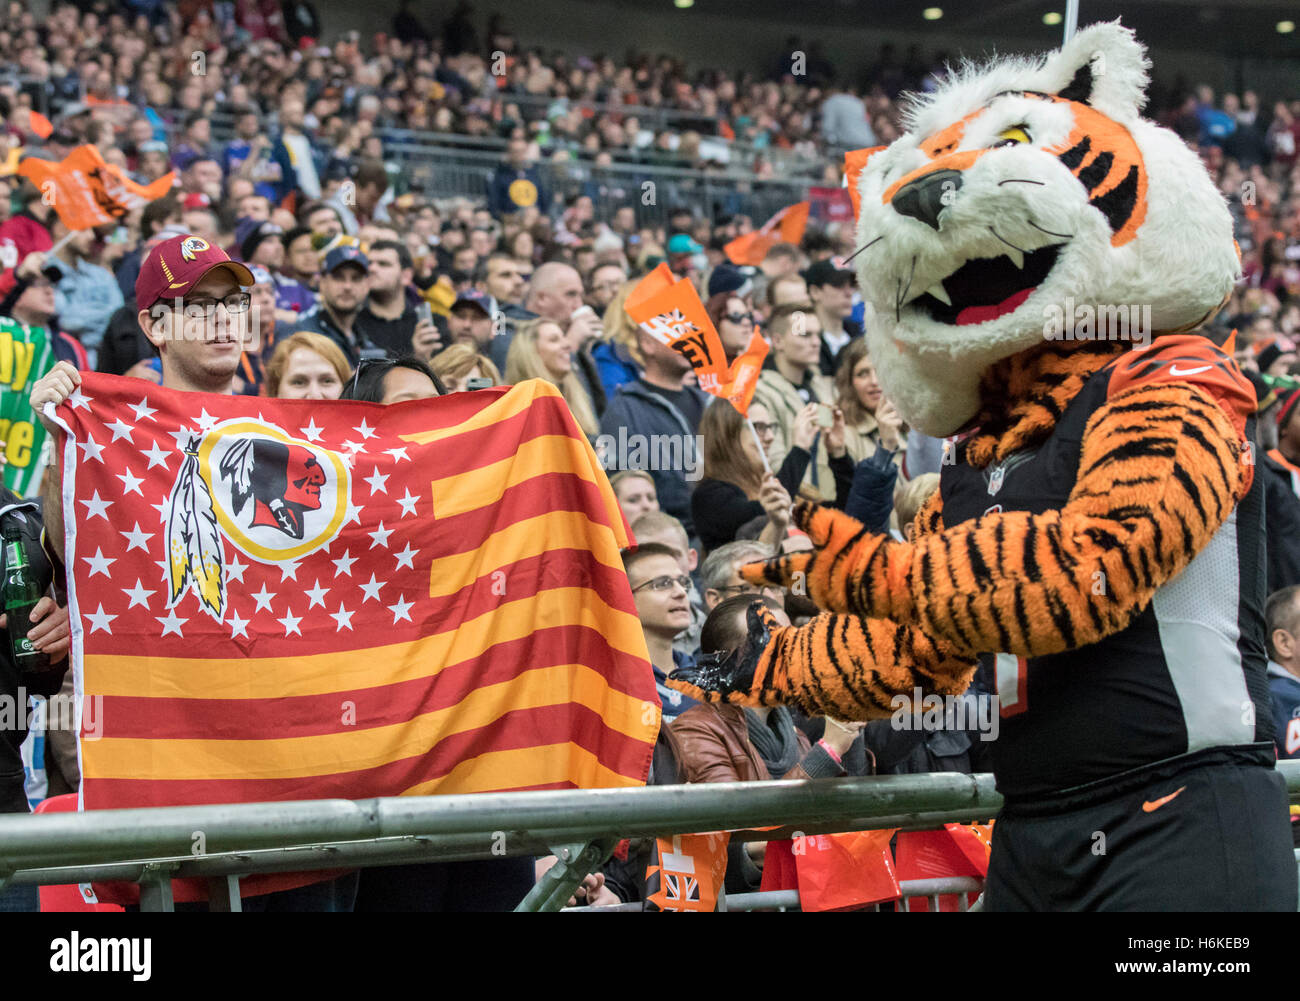 Wembley Stadium, London, UK. 30th Oct, 2016. NFL International Series. Cincinnati Bengals versus Washington Redskins. The Cincinnati mascot 'WHO-DEY' pointing to a Washington Redskins fan in the front row of the stands holding a Redskins flag during the game. © Action Plus Sports/Alamy Live News Stock Photo